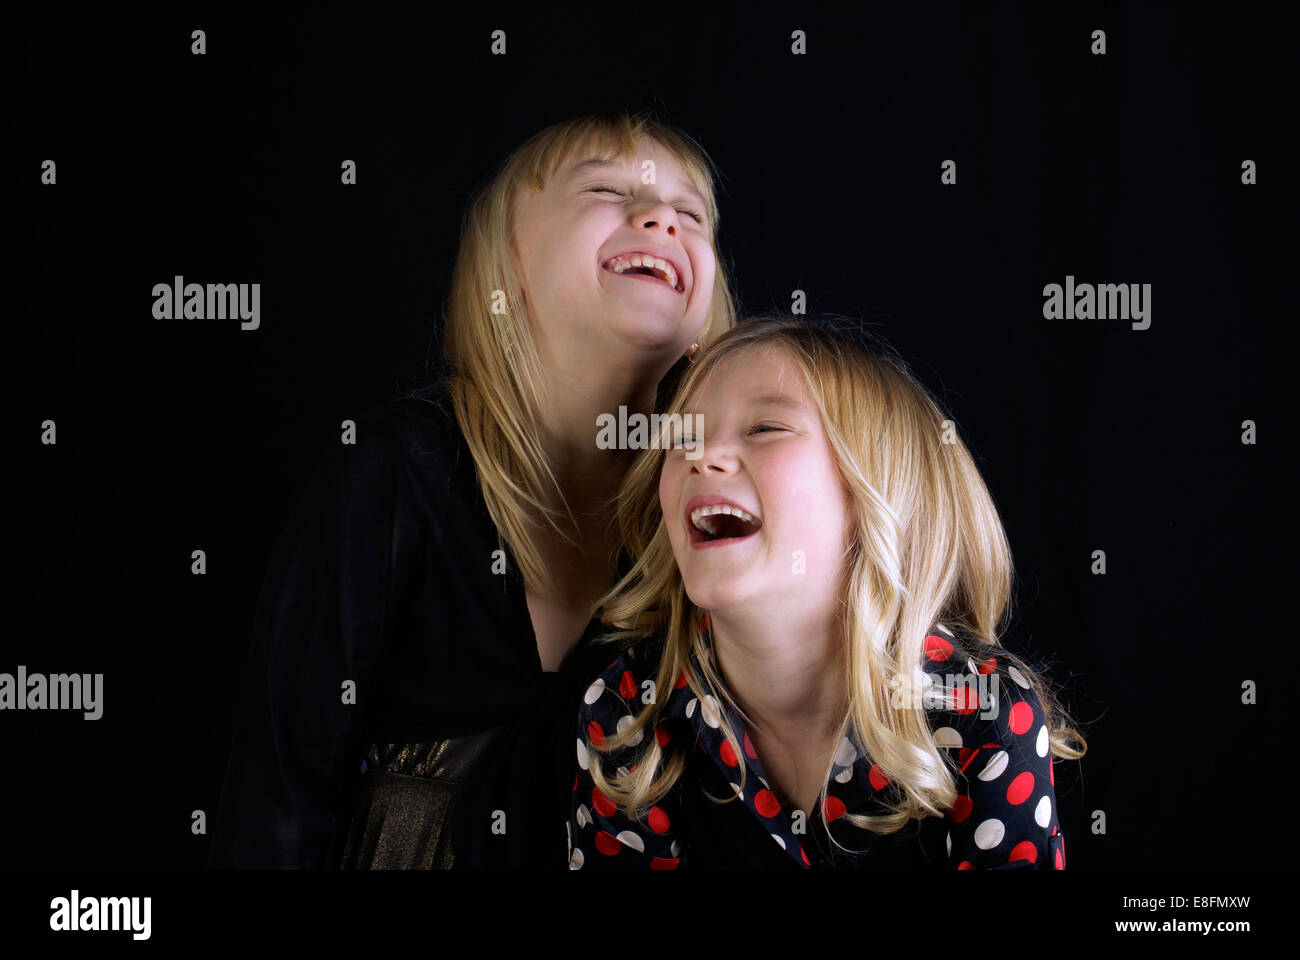 Studio shot of two Sisters (12-13, 16-17) laughing Stock Photo